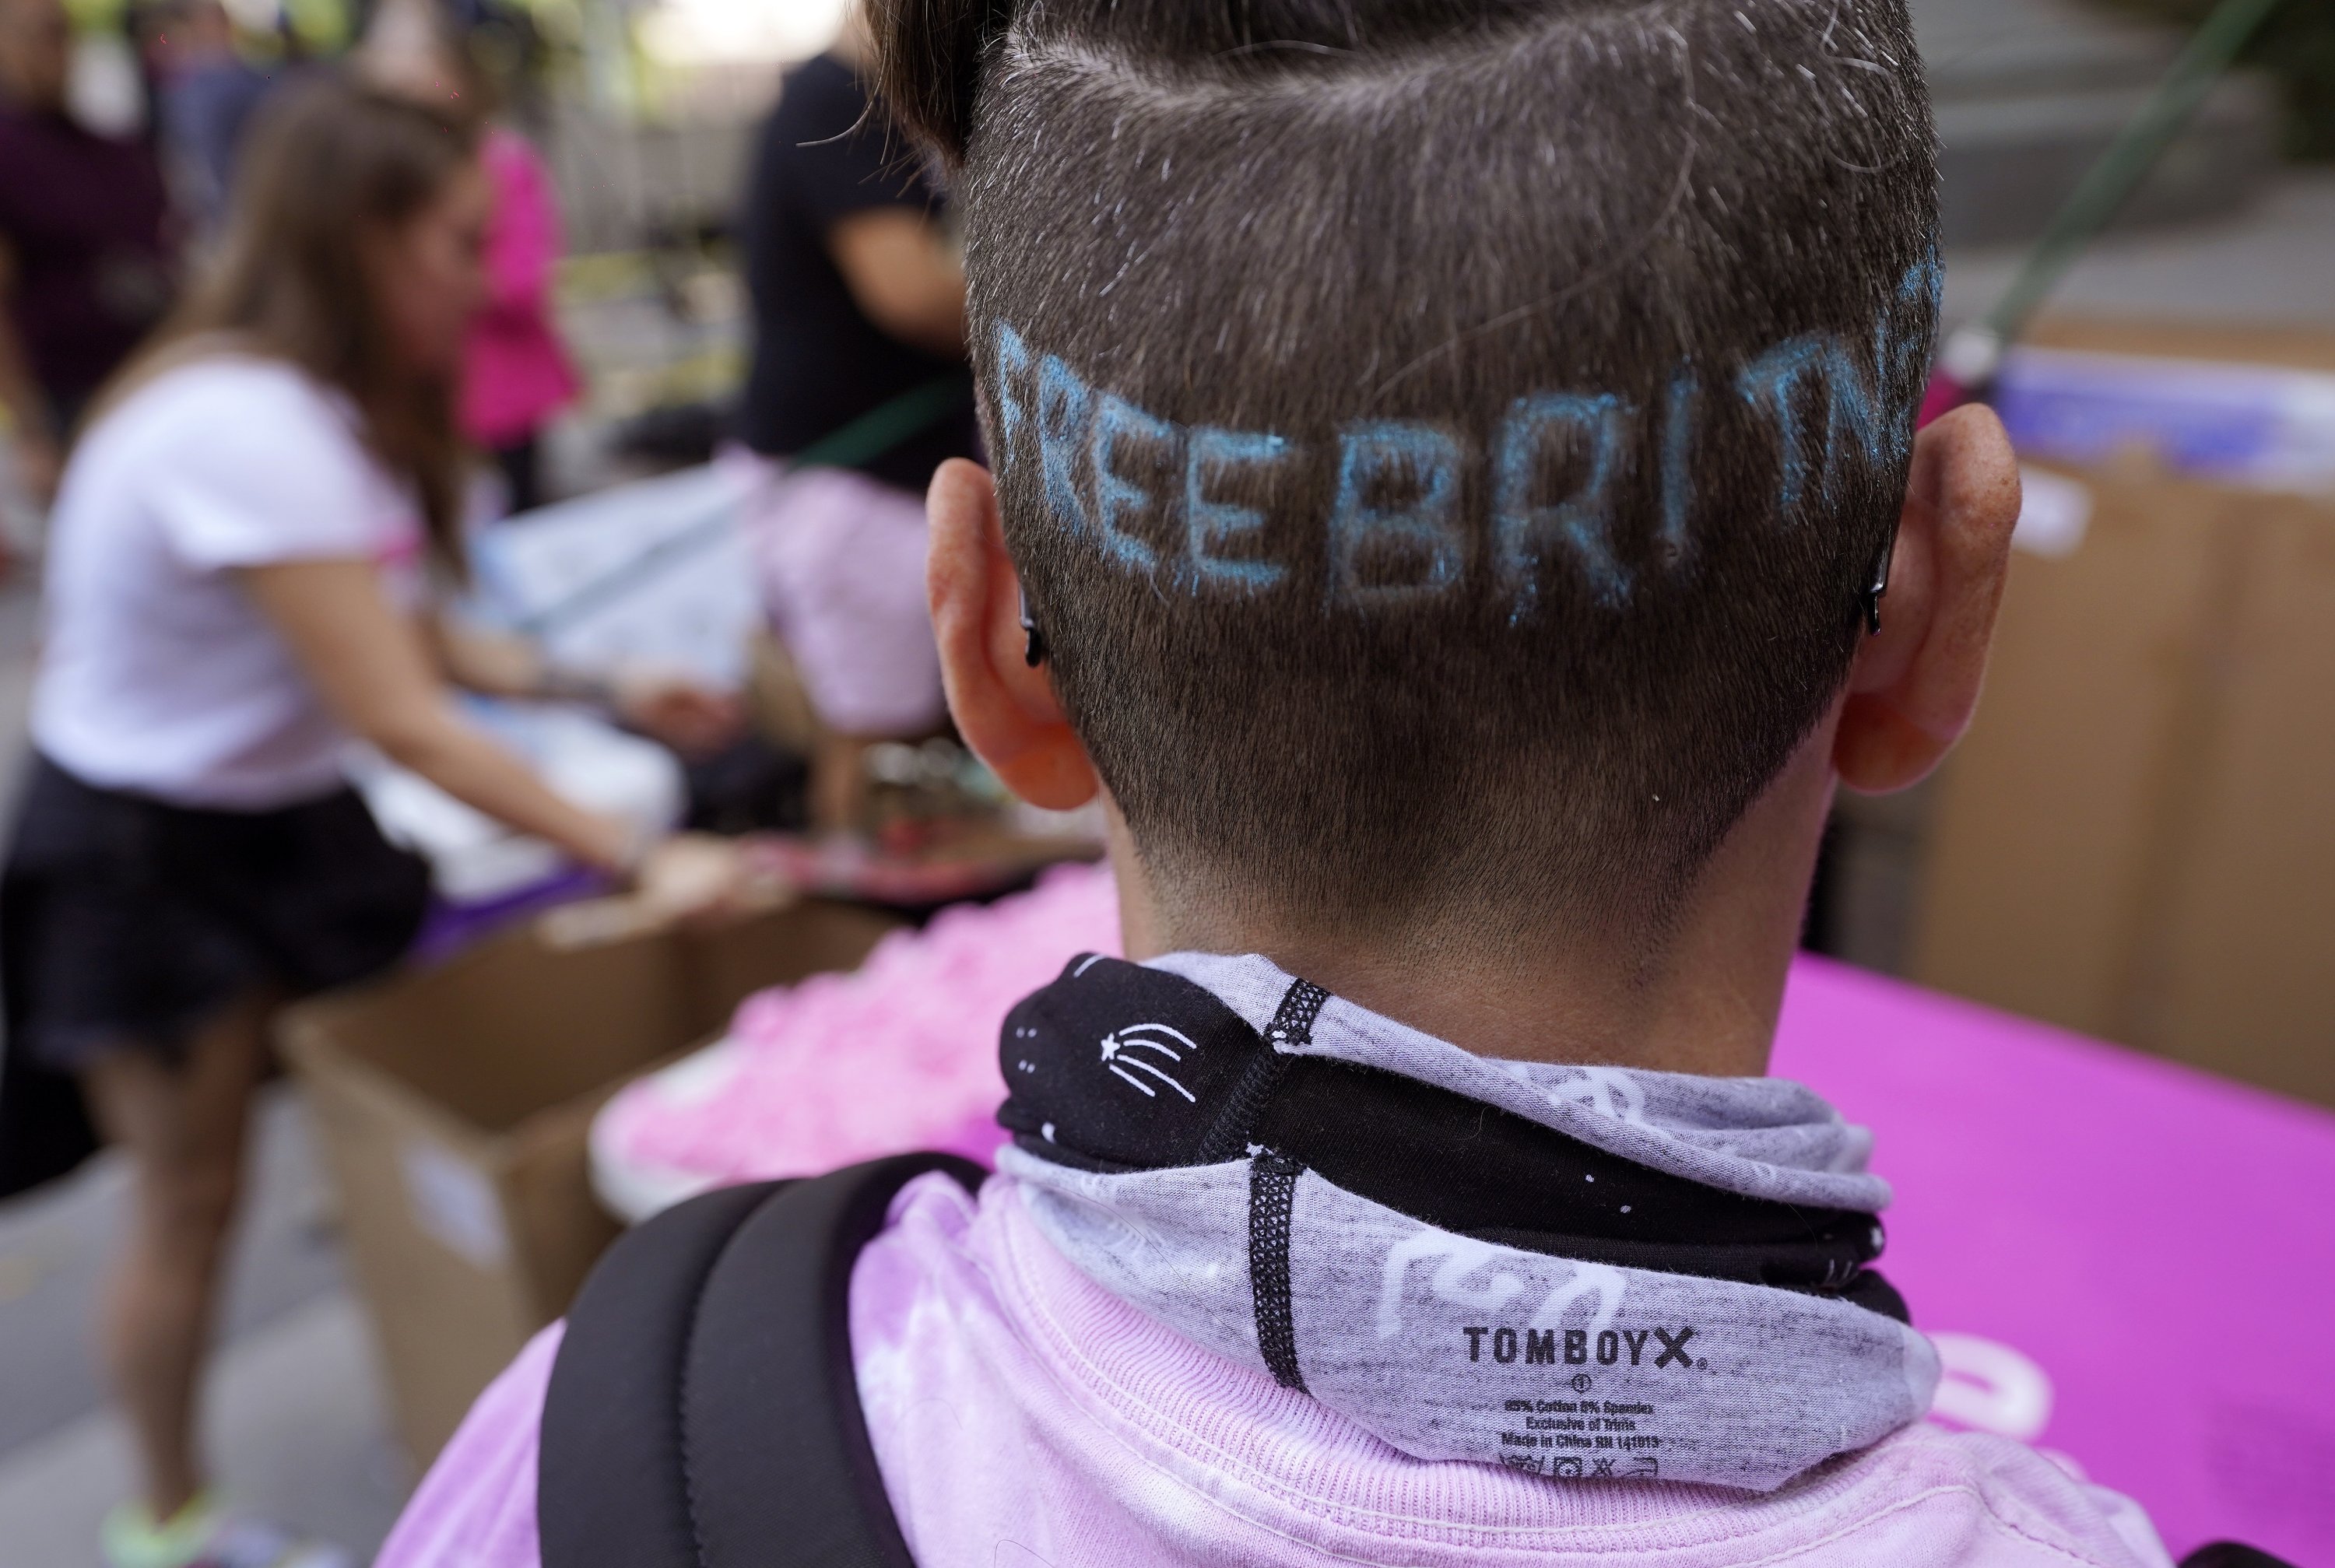 Britney Spears supporter Kim Van Doorn of Bakersfield, Calif., shows off a 'Free Britney' design in her hair outside the Stanley Mosk Courthouse, Sept. 29, 2021, Los Angeles, U.S. (AP Photo)